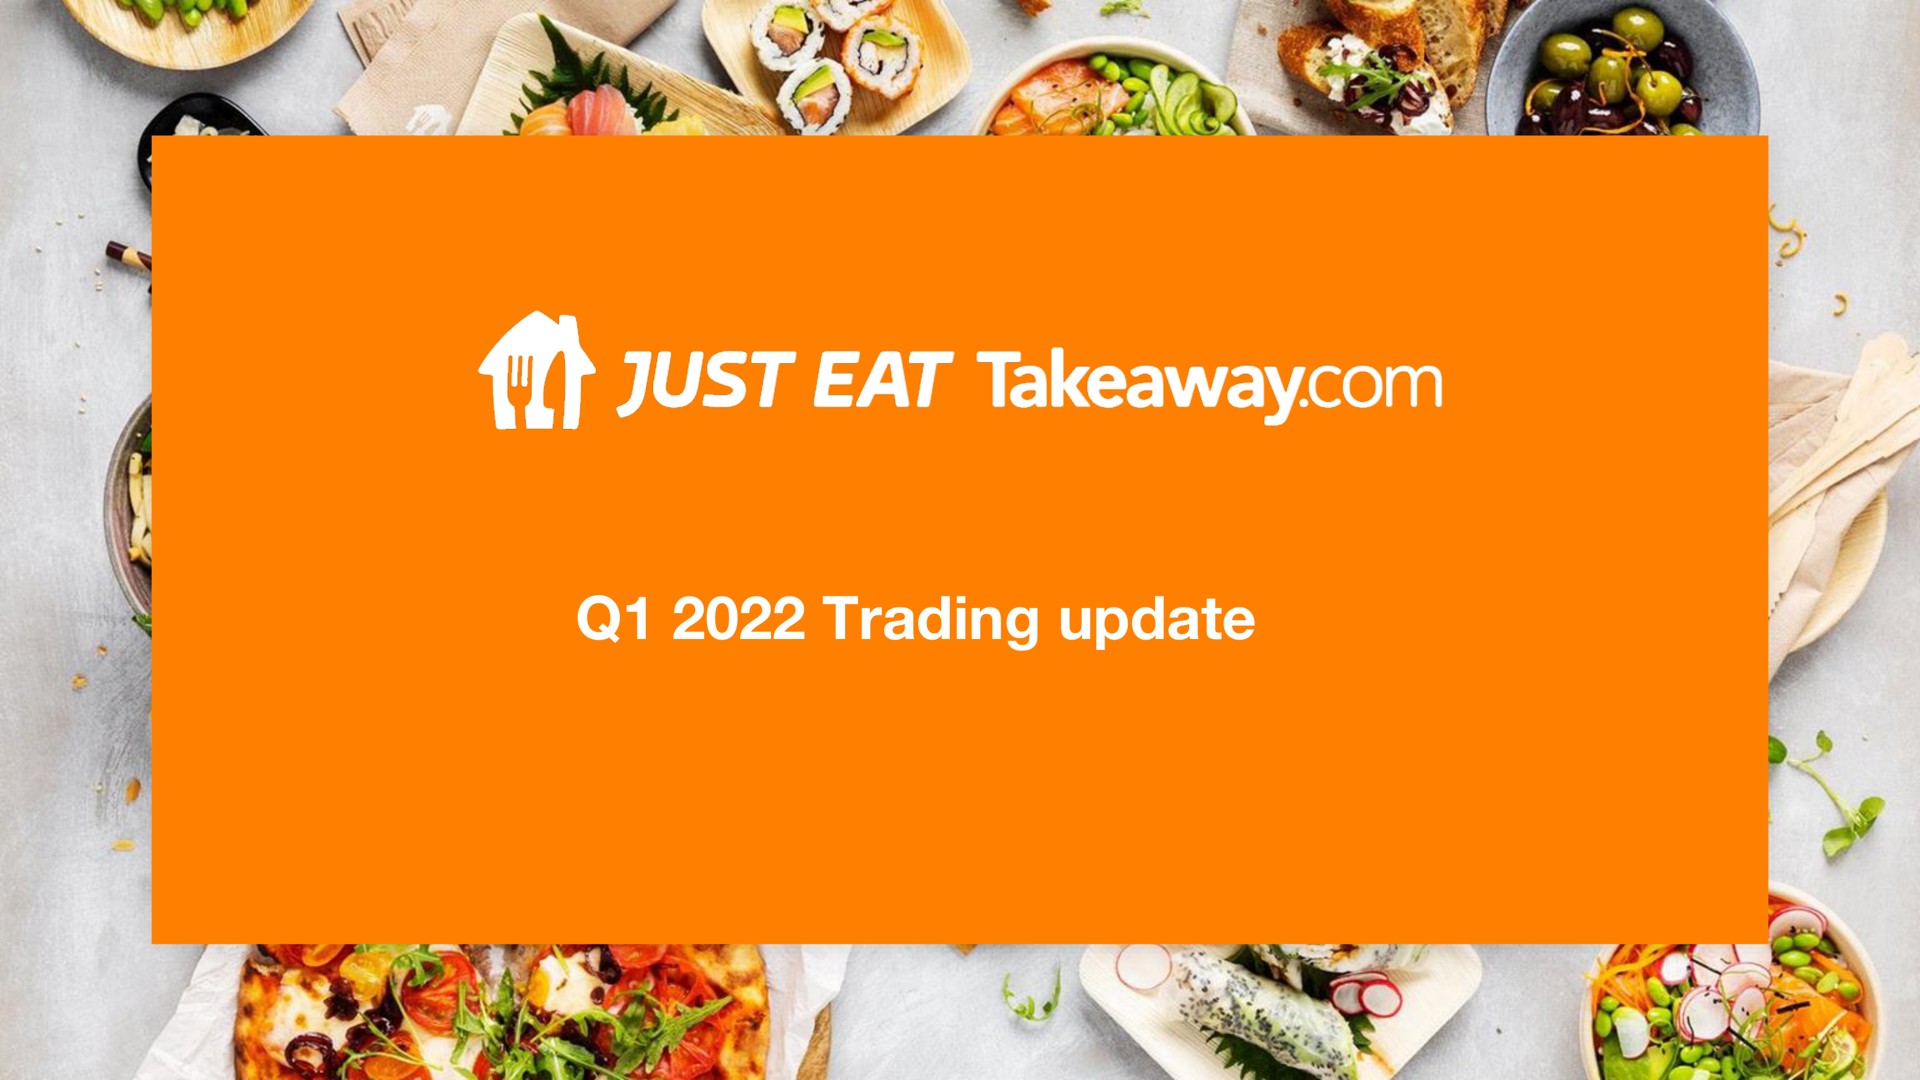 trading update just eat | Just Eat Takeaway.com